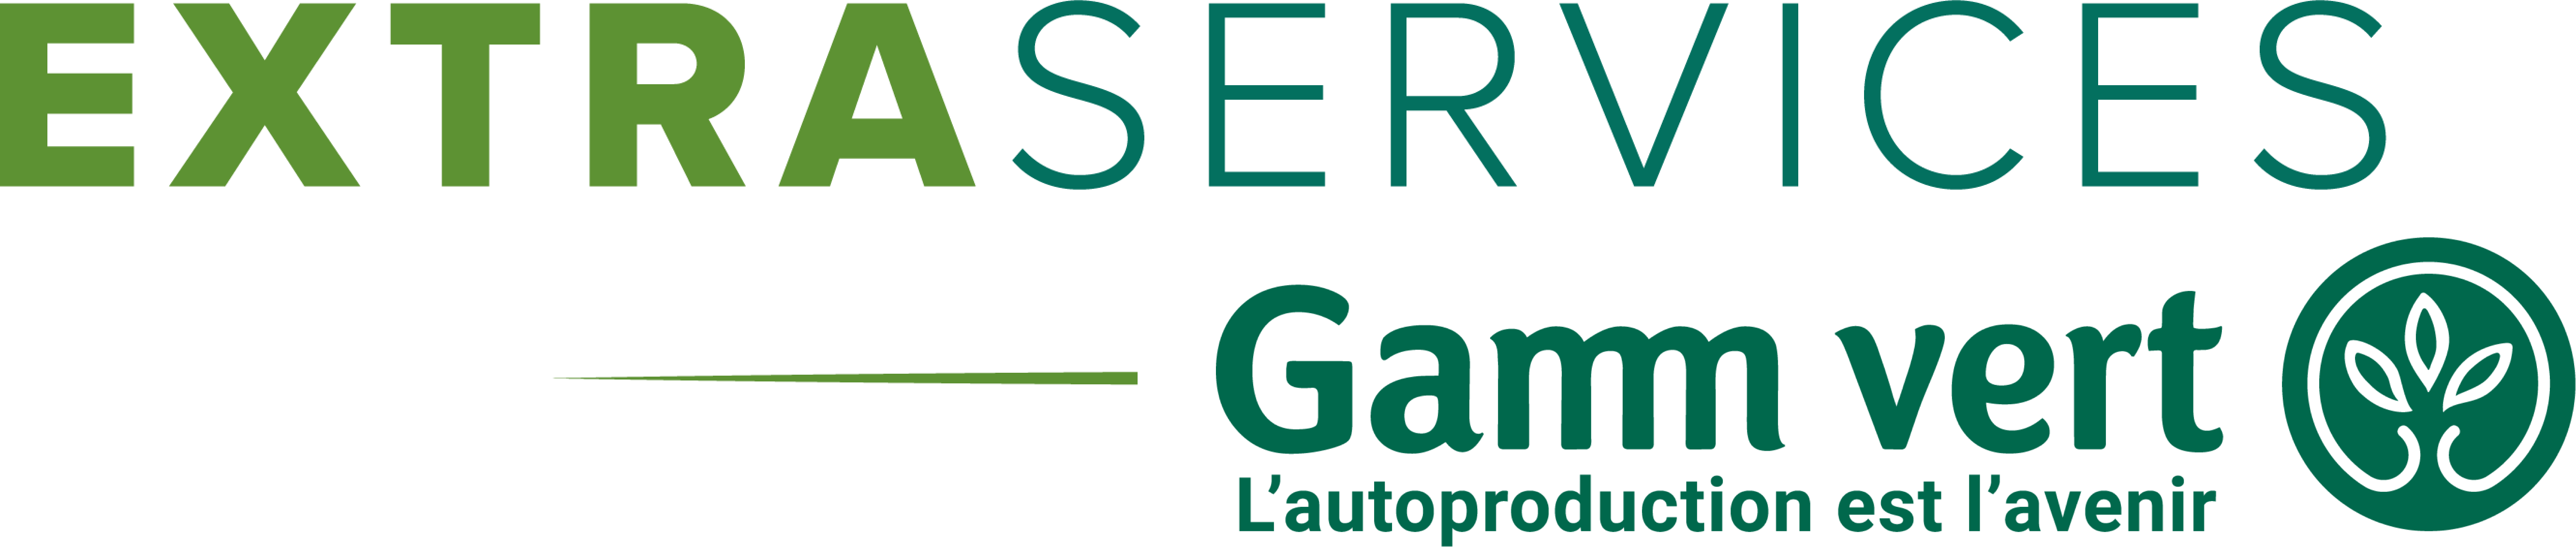 Gammvert ExtraServices